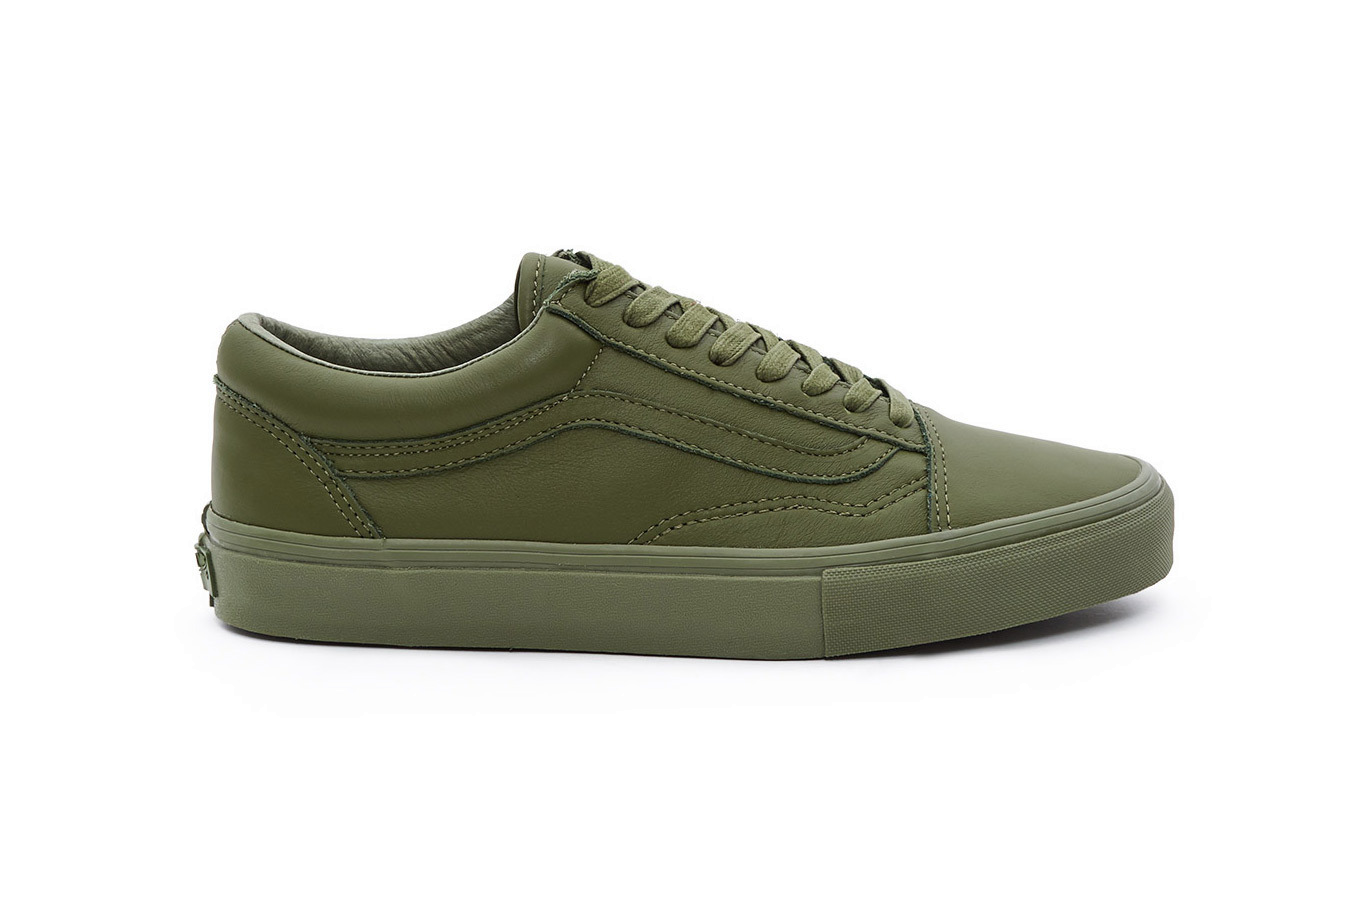 Opening Ceremony x Vans Old Skool “Leather Mono” Chive